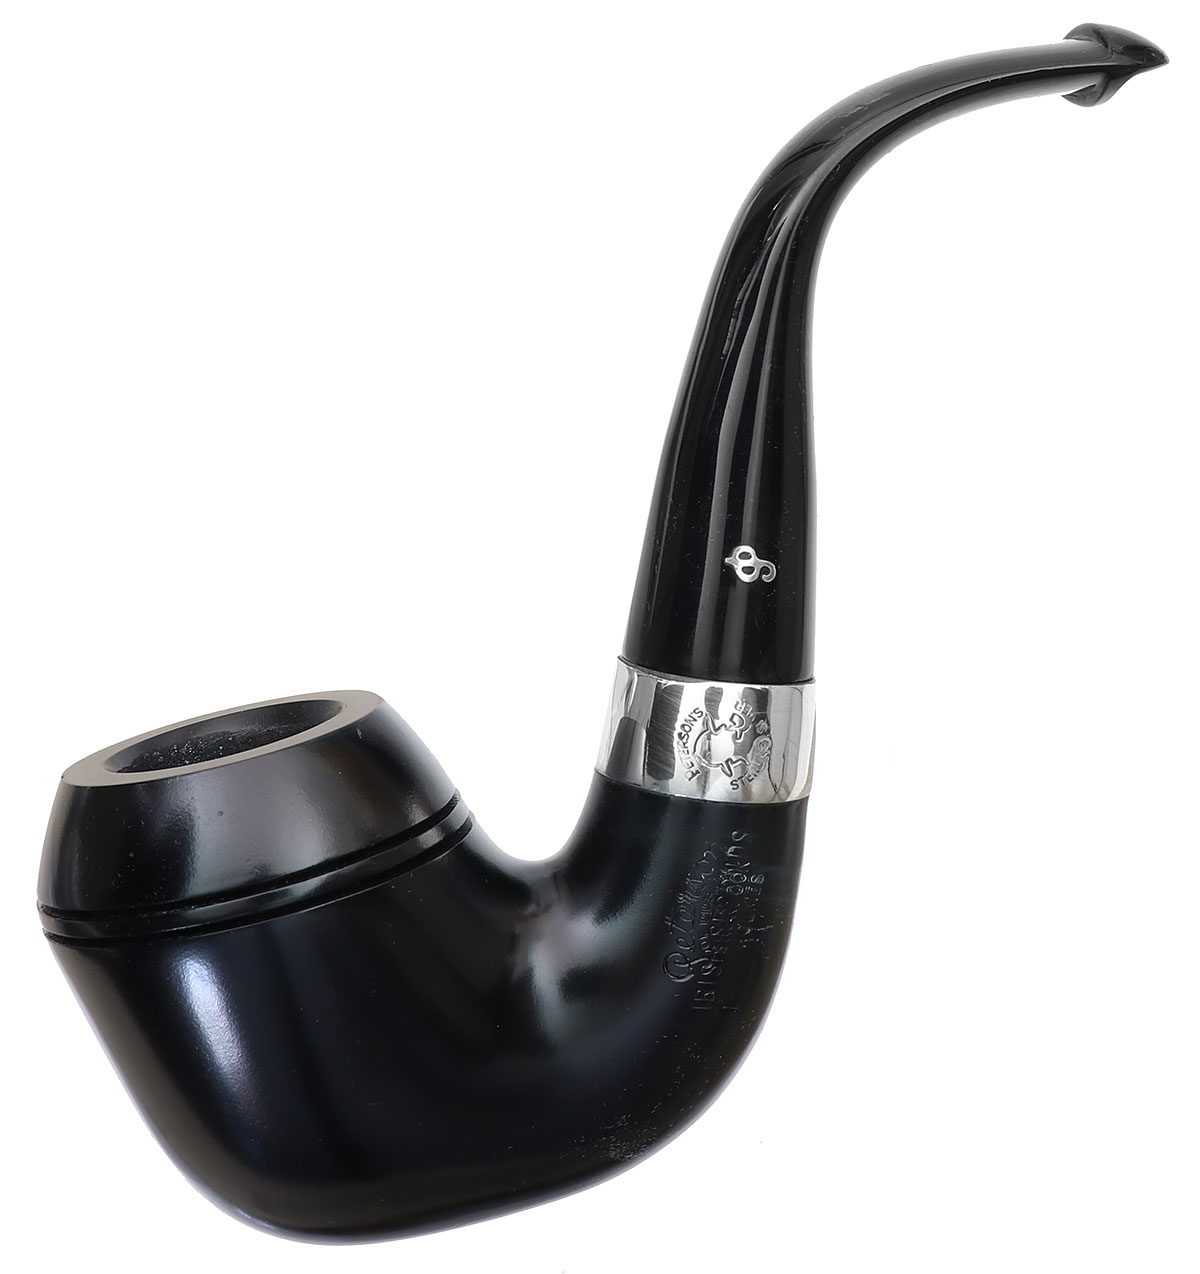 Irish Seconds Smooth Rhodesian with Silver Band P-Lip (2)